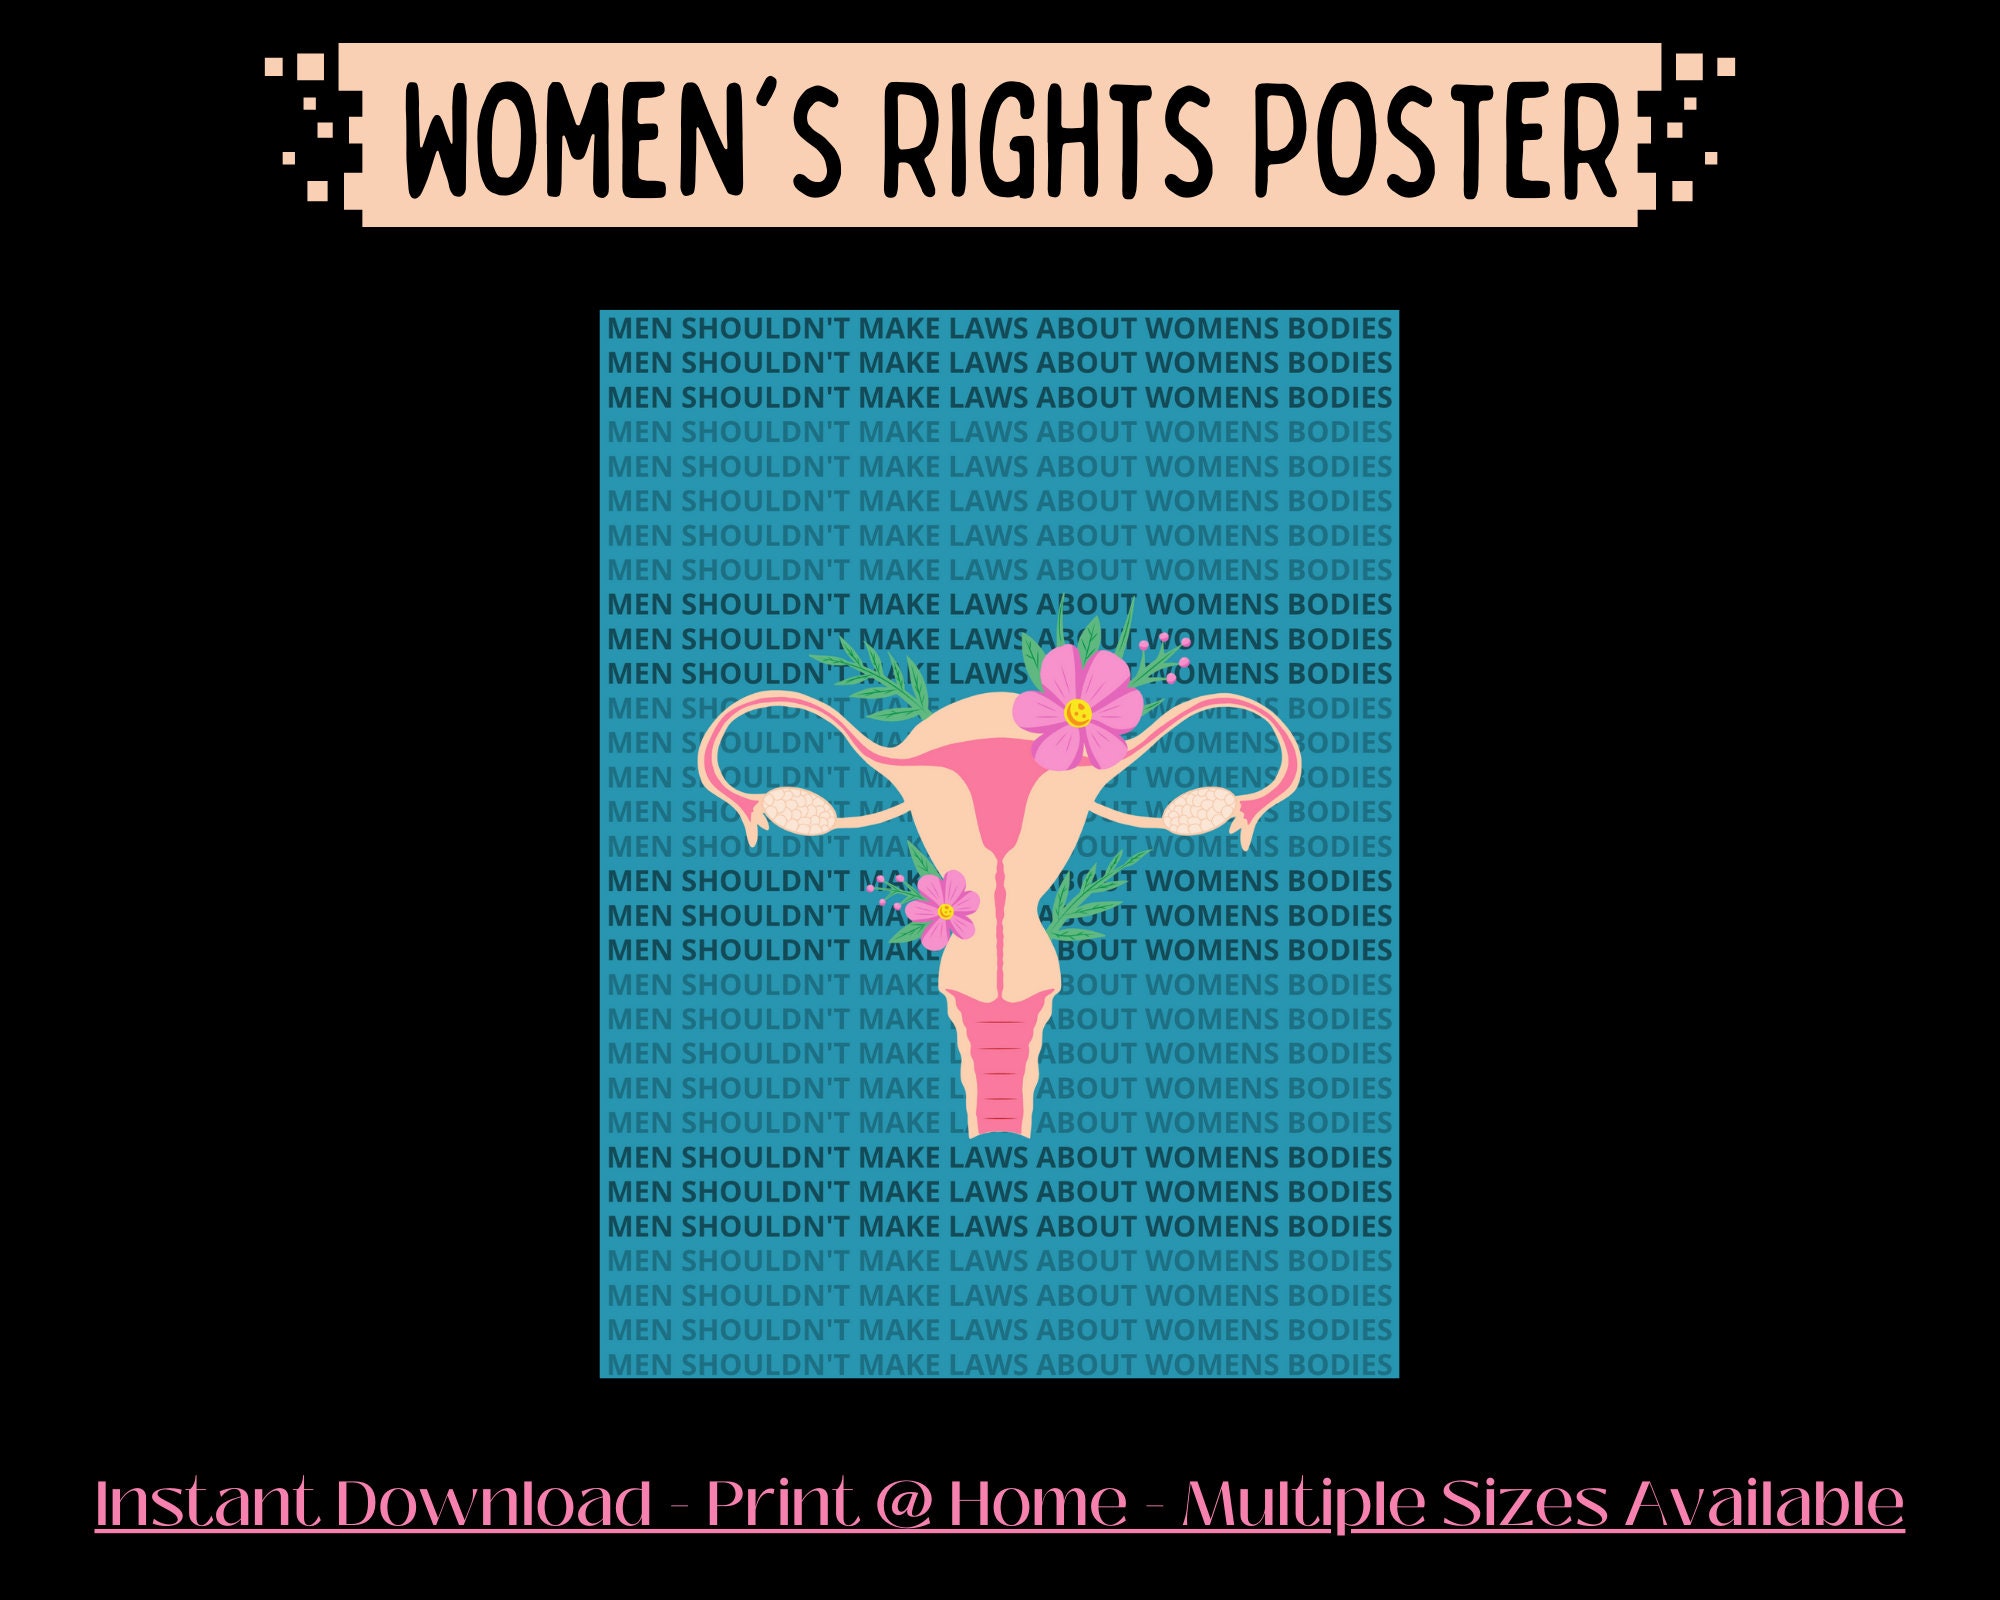 Women's Reproductive Right's Poster, Protest Poster, Vasectomy Promotion, Posters For Women's Rights, Feminism Activist Poster, Human Rights-1